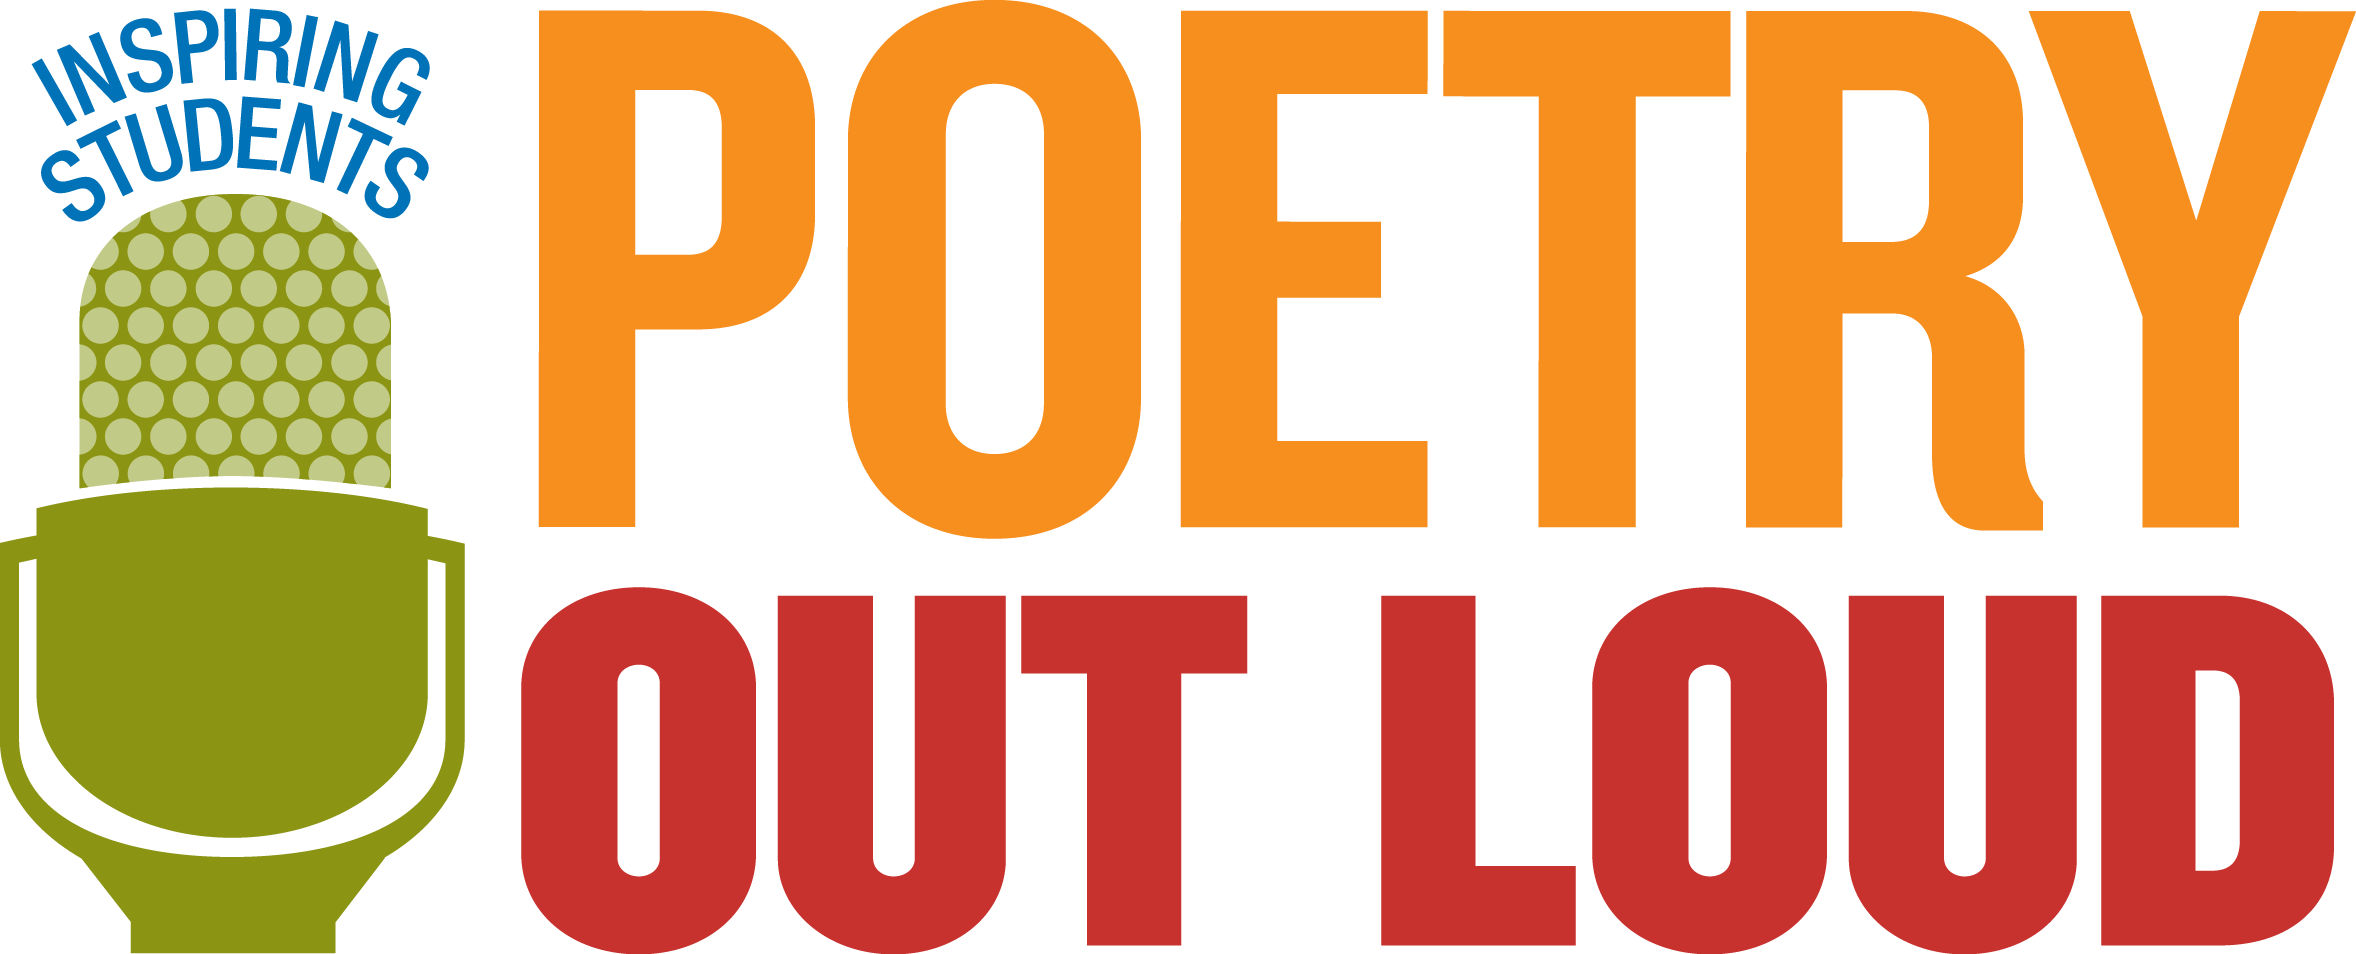 Teachers and students – it’s time to sign up for Poetry Out Loud!